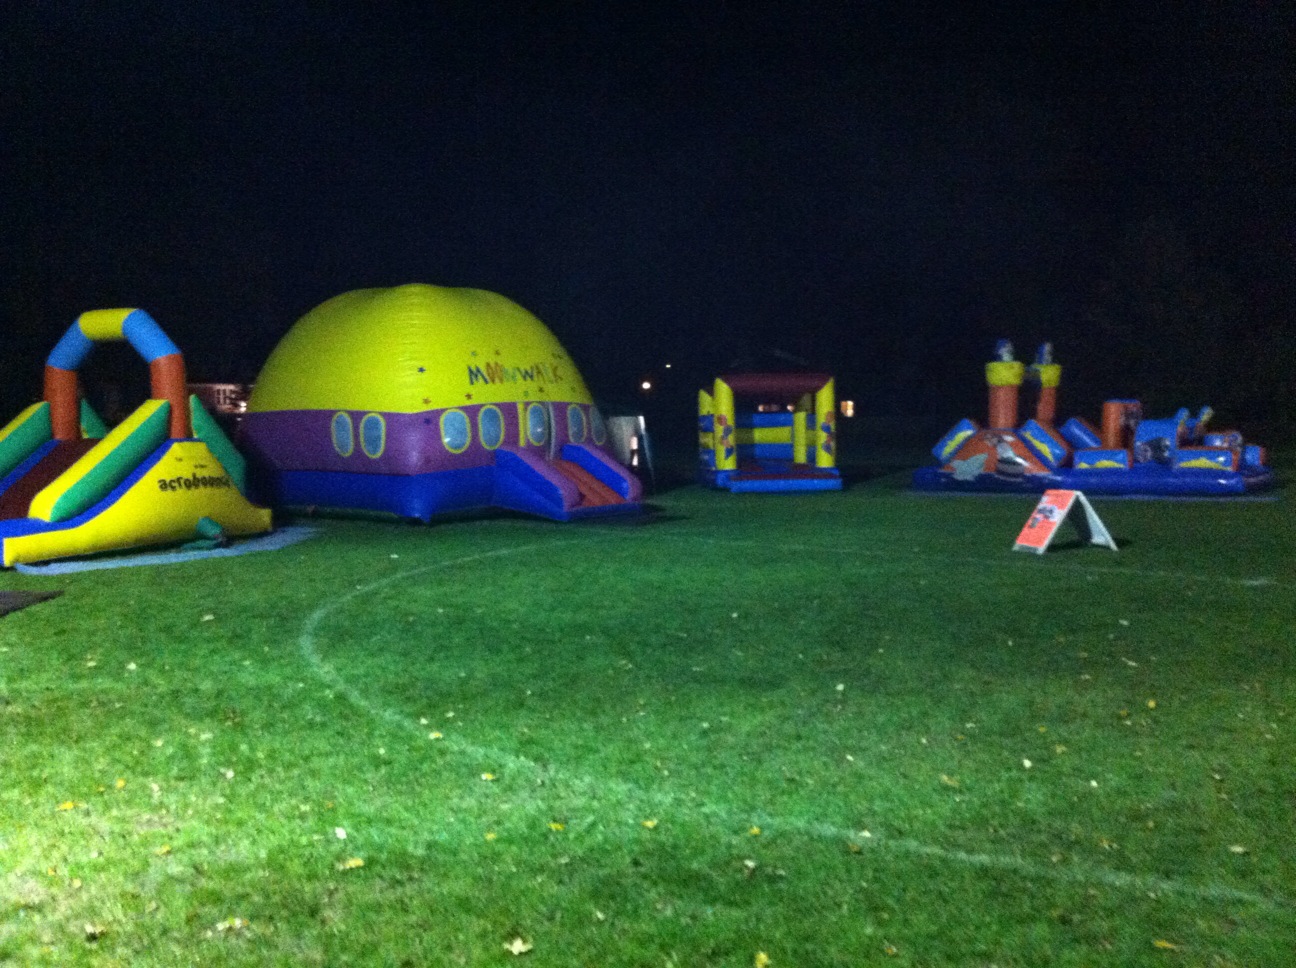 Slightly bigger inflatable setup for a night event